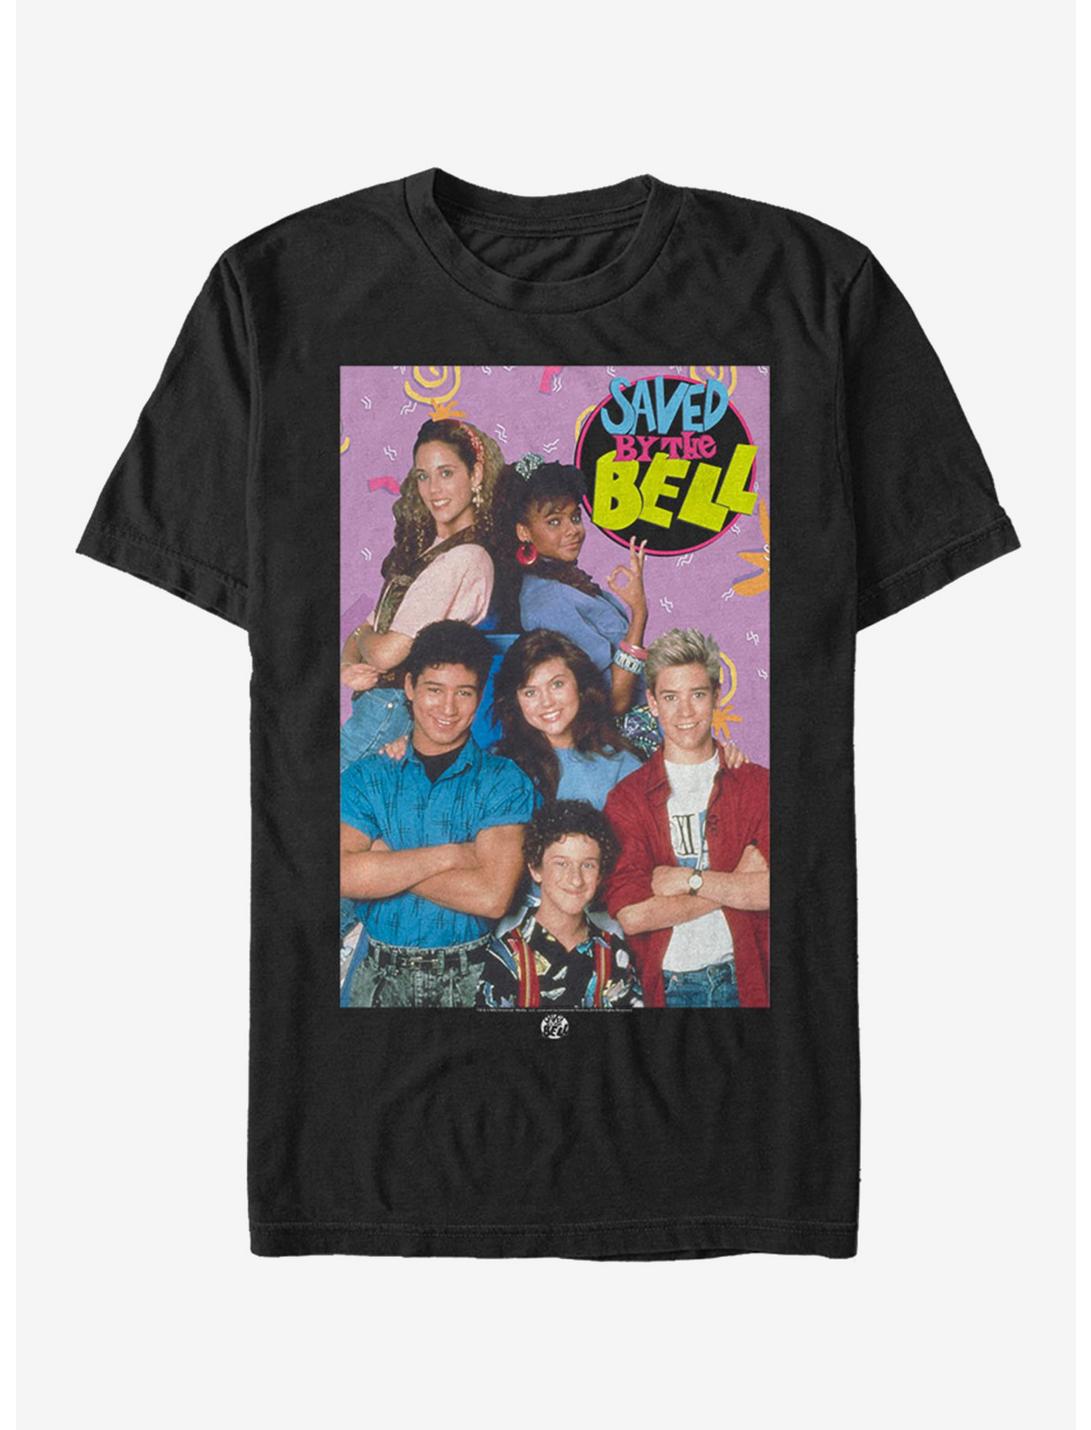 Saved By the Bell Poster T-Shirt, BLACK, hi-res